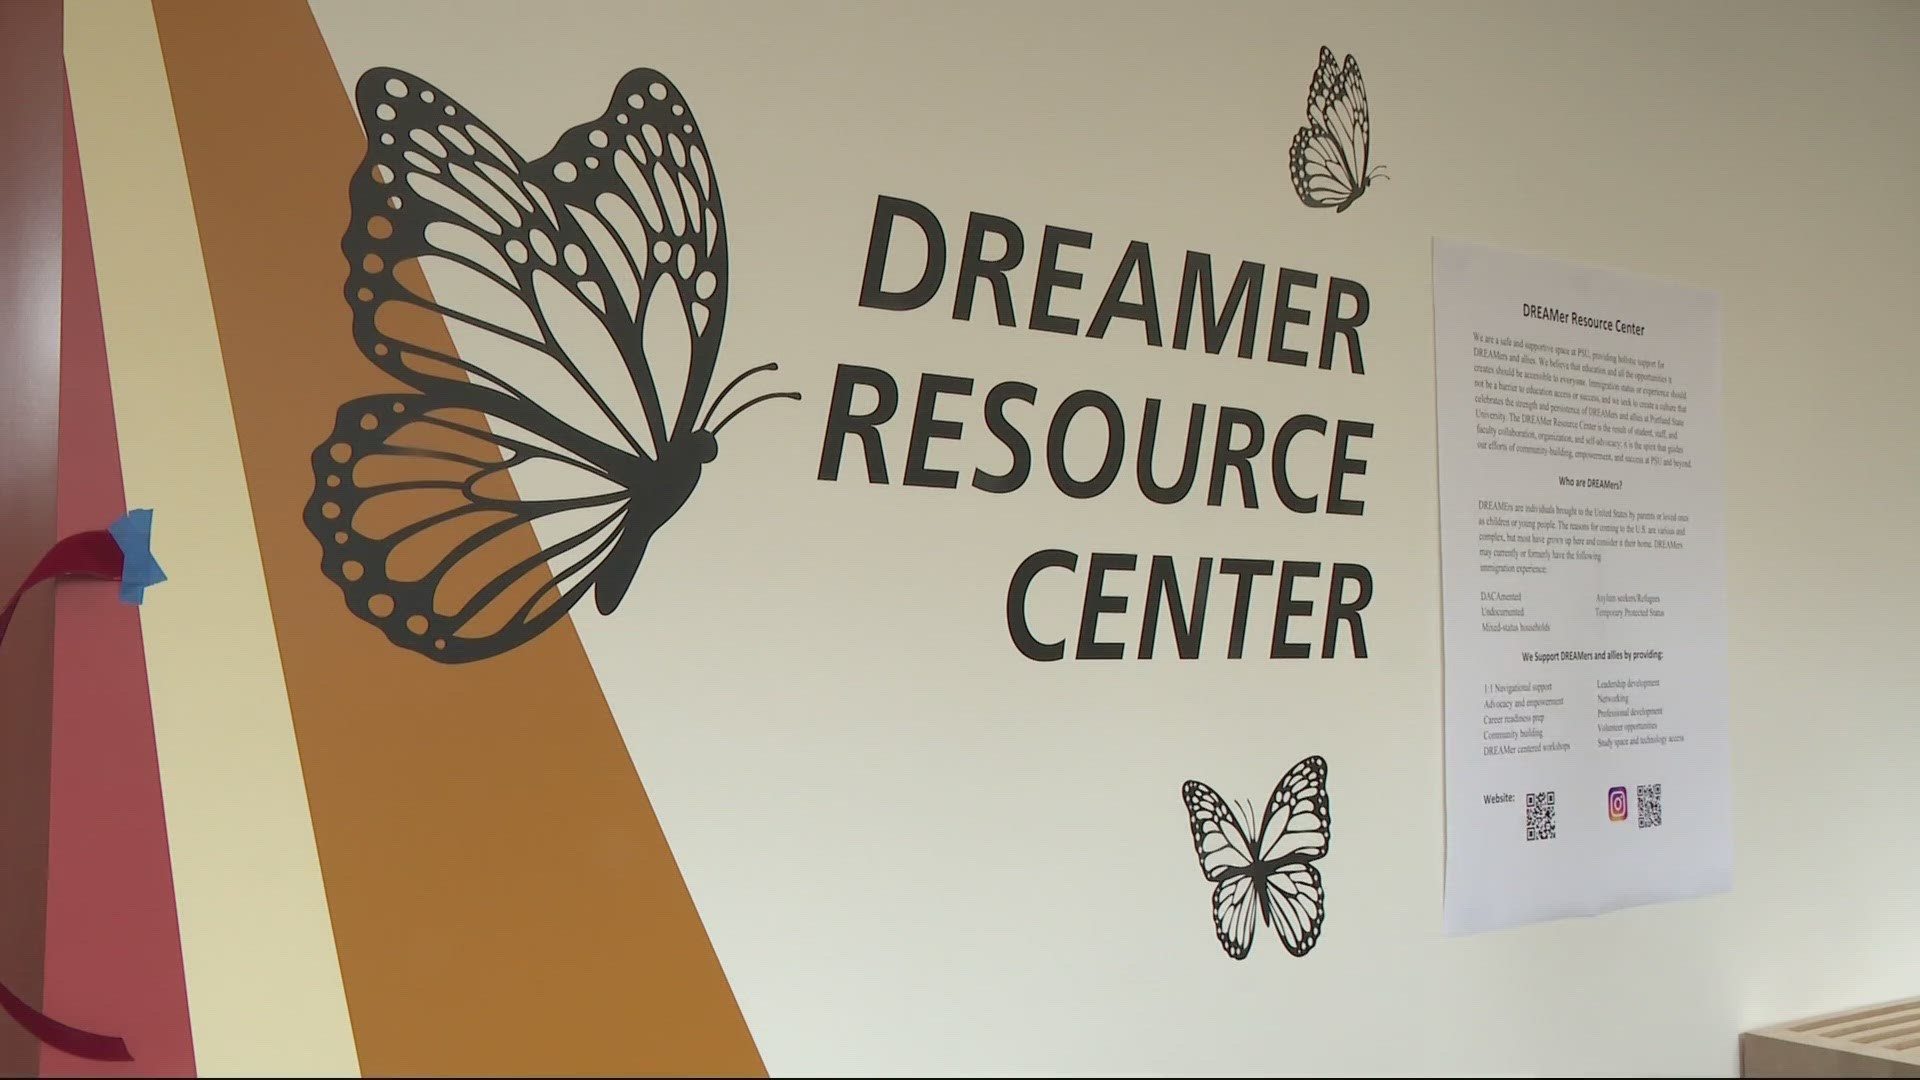 University officials say the new center formalizes PSU's commitment to provide a safe, supportive space for 'Dreamers.'